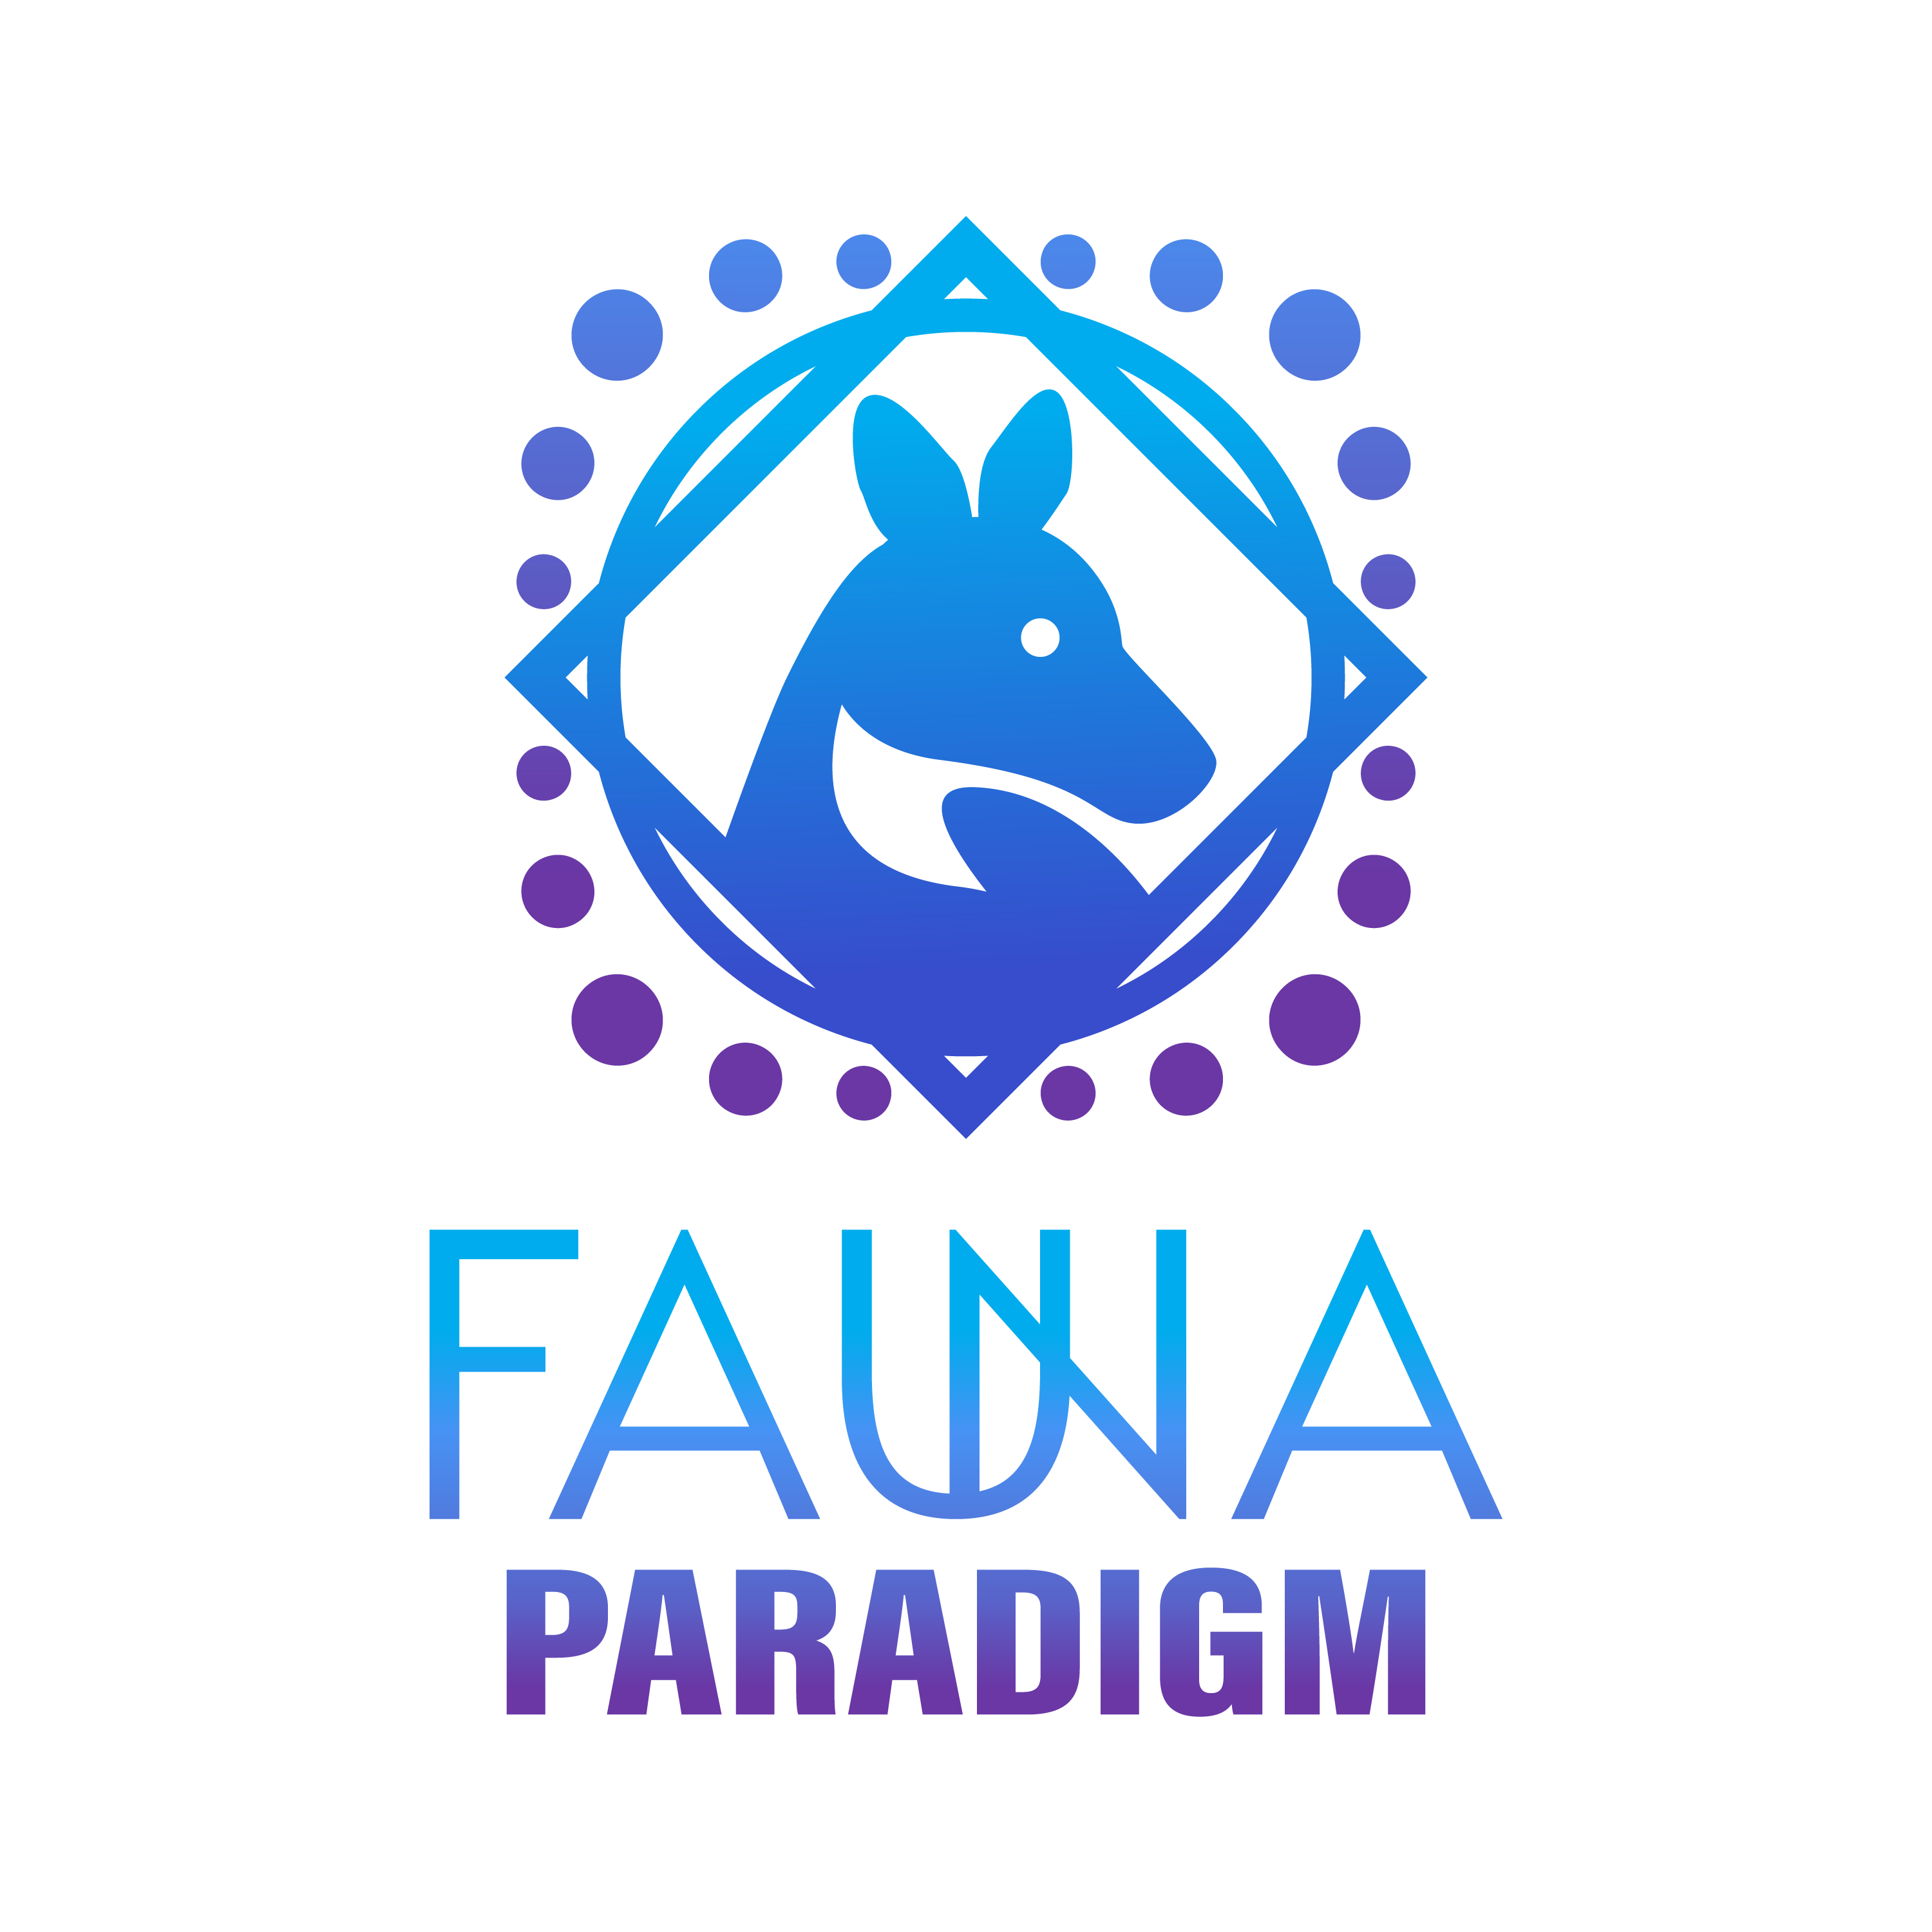 Introduction To The Fauna Paradigm